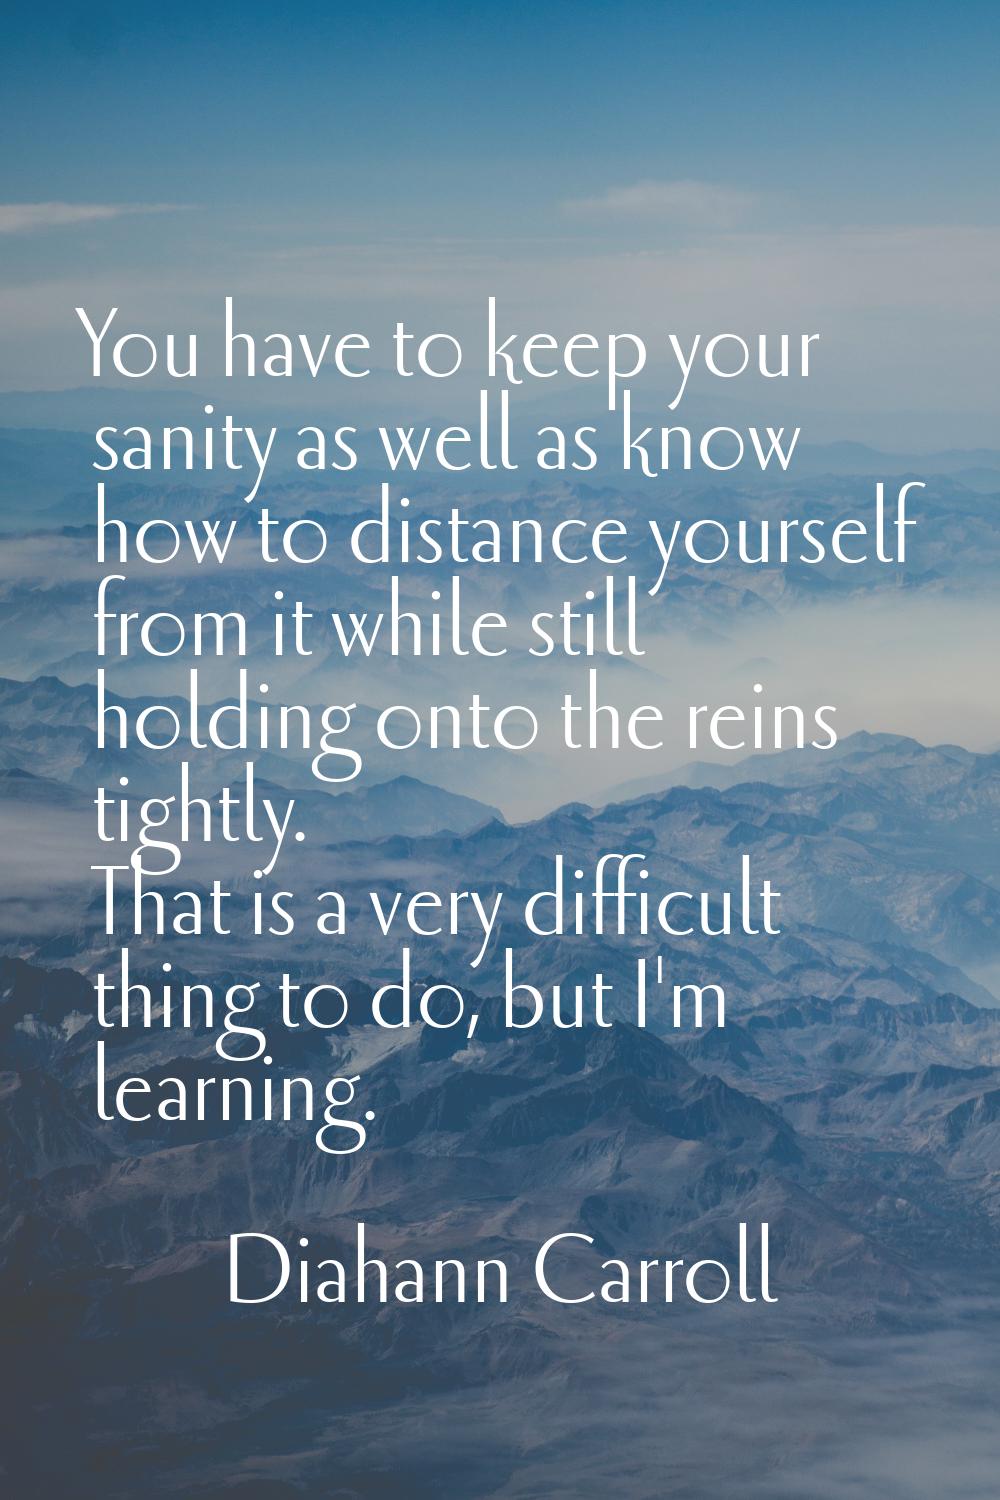 You have to keep your sanity as well as know how to distance yourself from it while still holding o